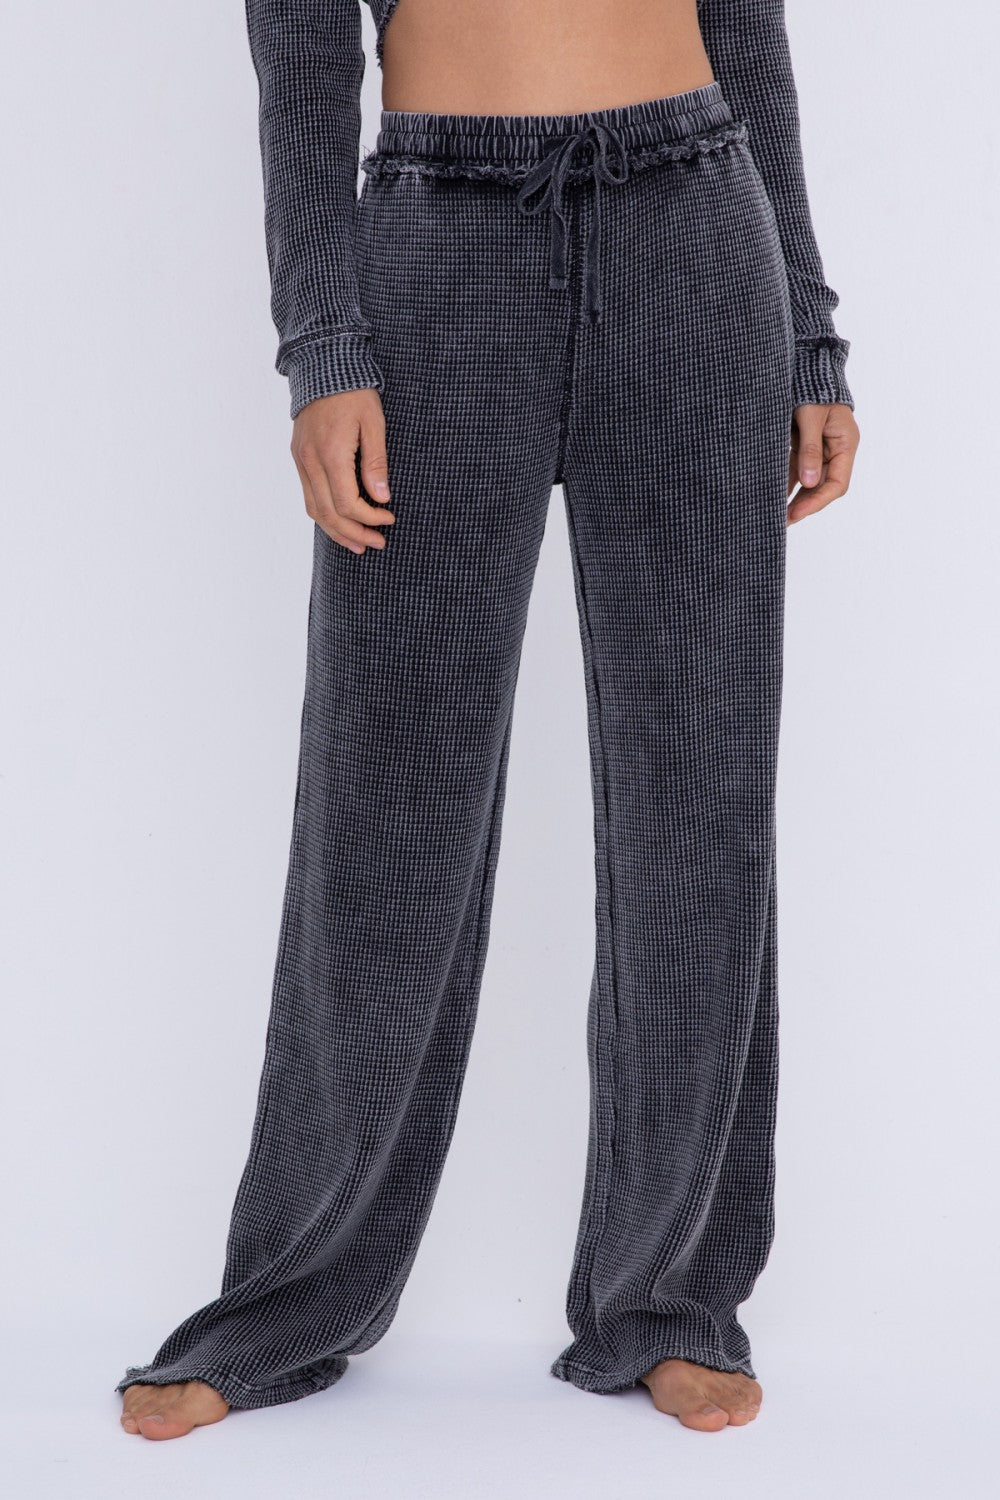 Mineral Washed Lounge Pants